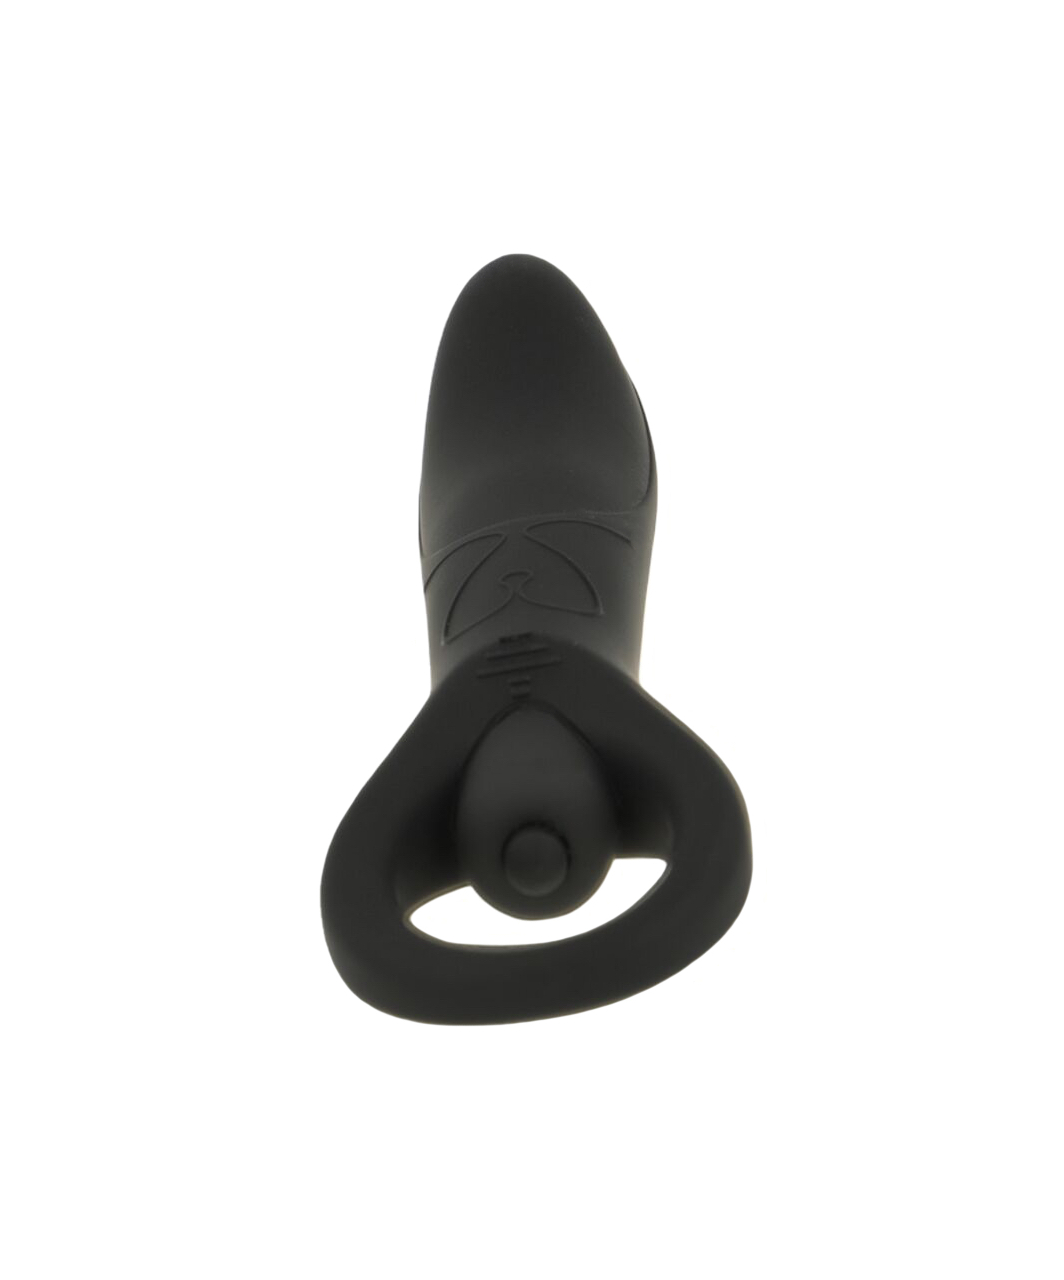 Temptation Unboxed Anal Vibrator With Ring